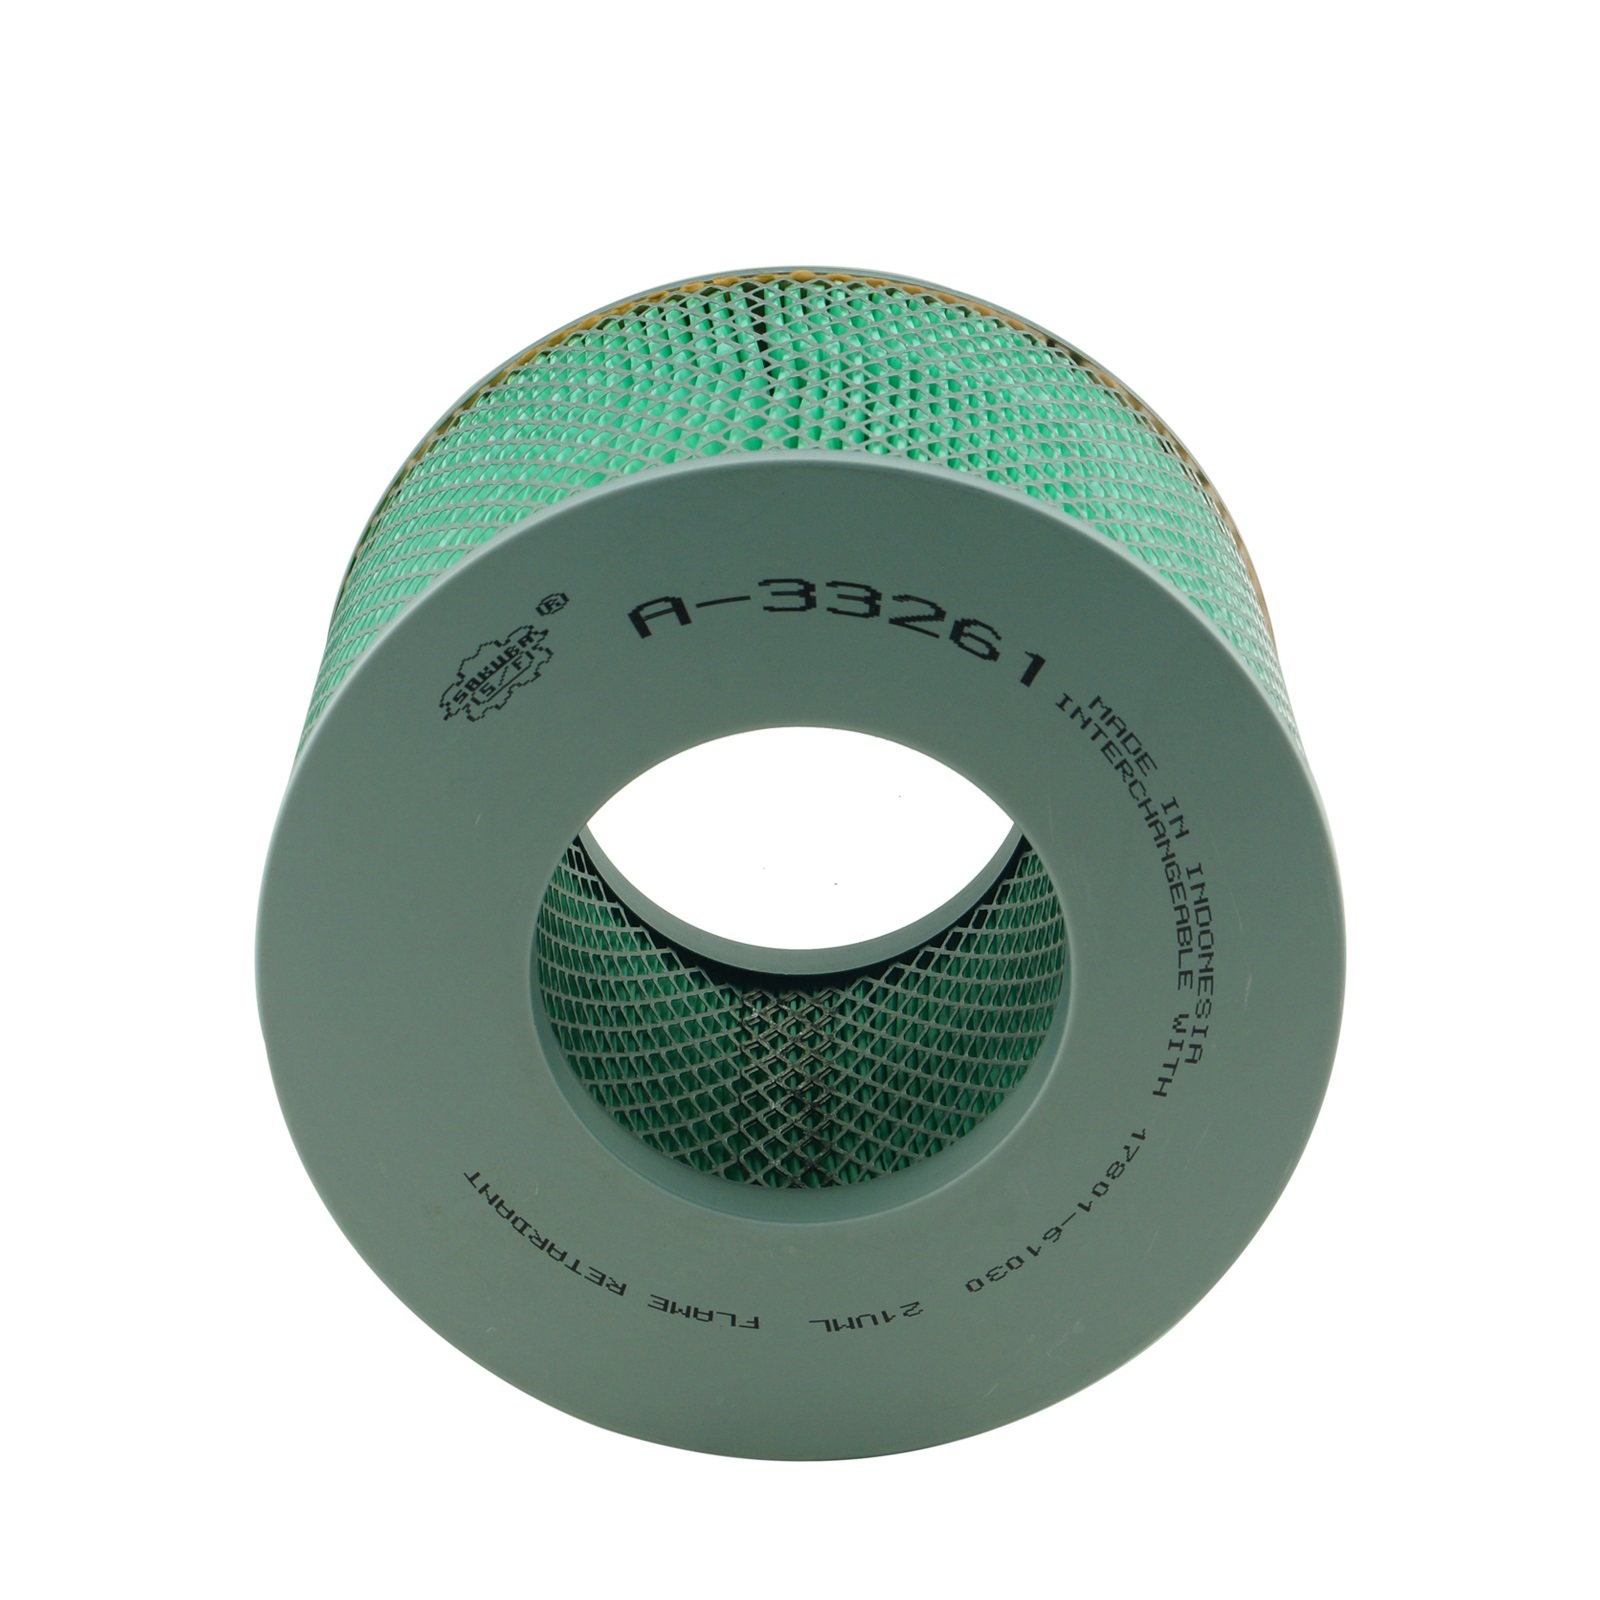 FA-33261 Sakura Air Filter - Fits Toyota + More Xref: A340, PA2042, AF4509